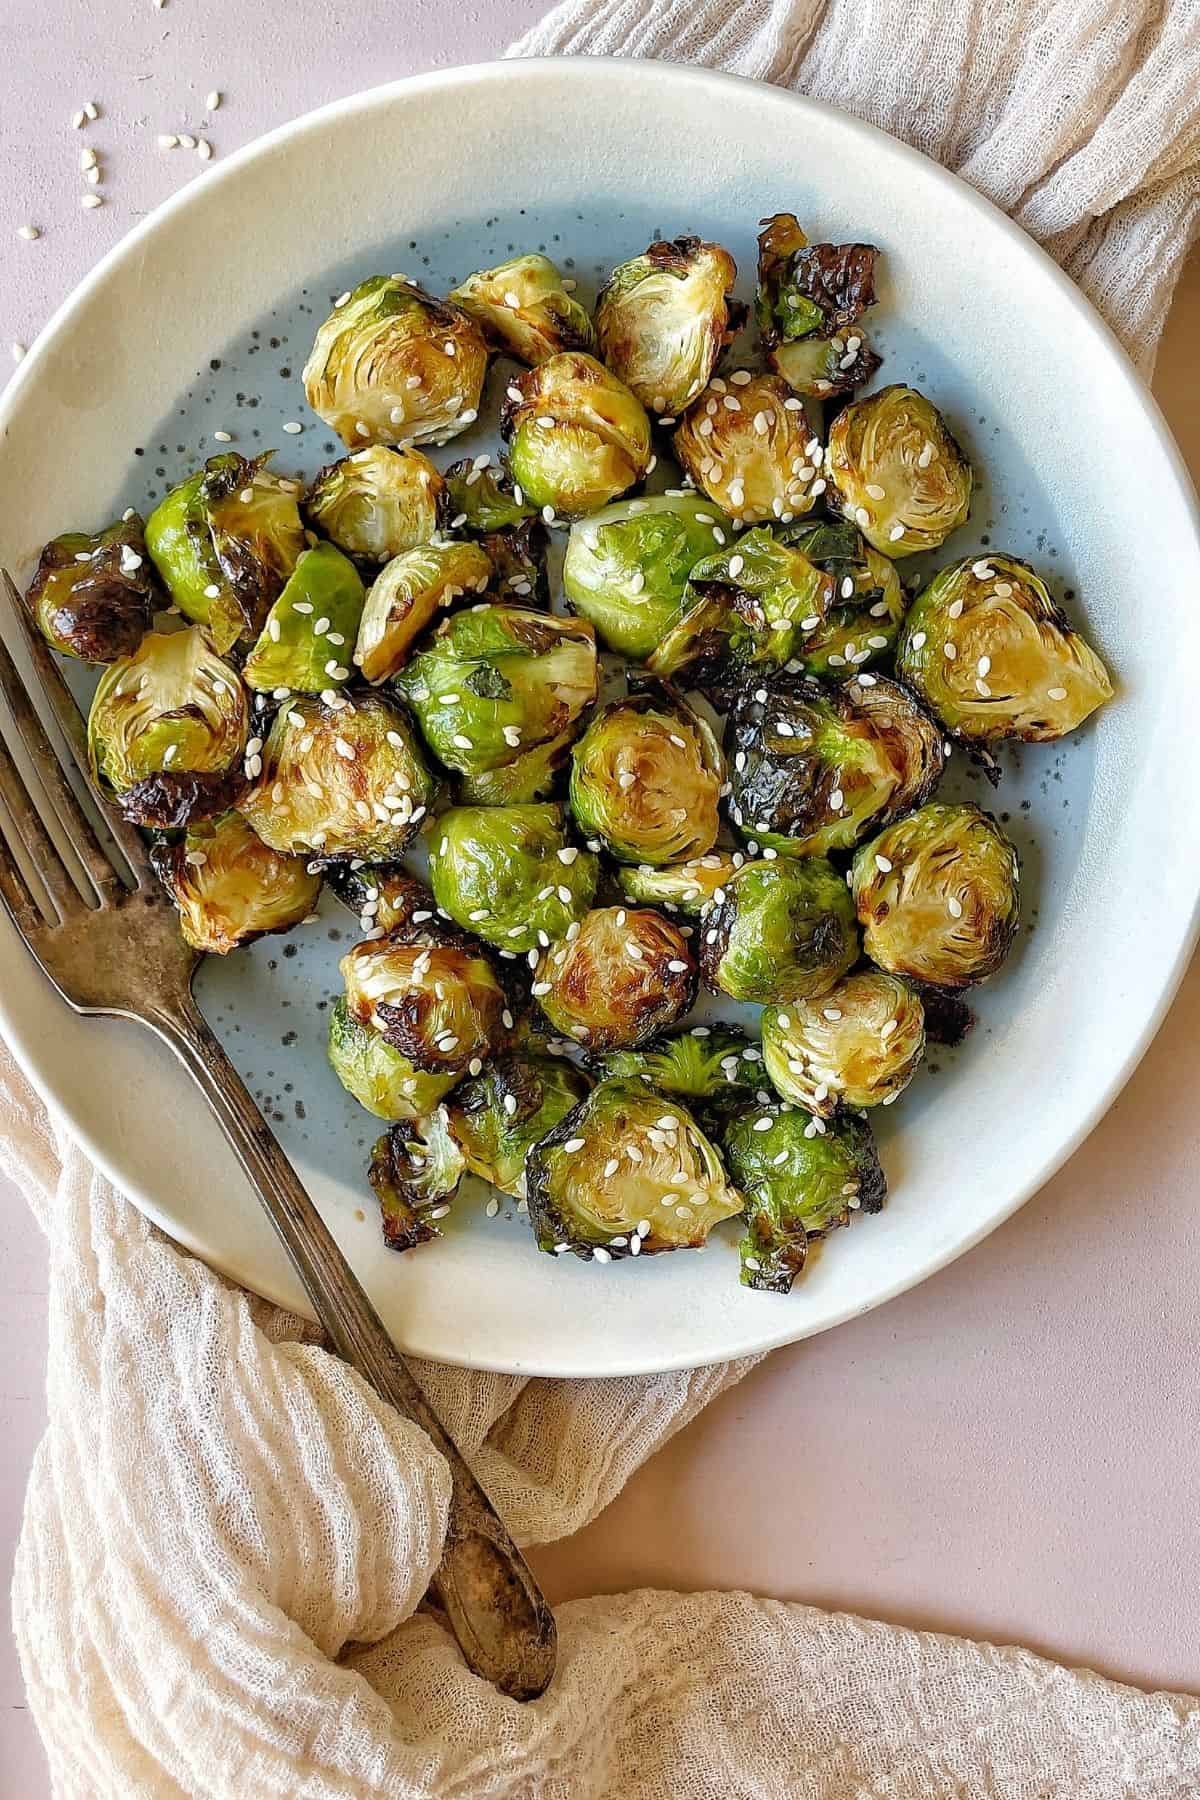 These Brussel sprouts are coated in a flavorful glaze and roasted until crisp and browned. Then they are topped with a generous amount of sesame seeds.